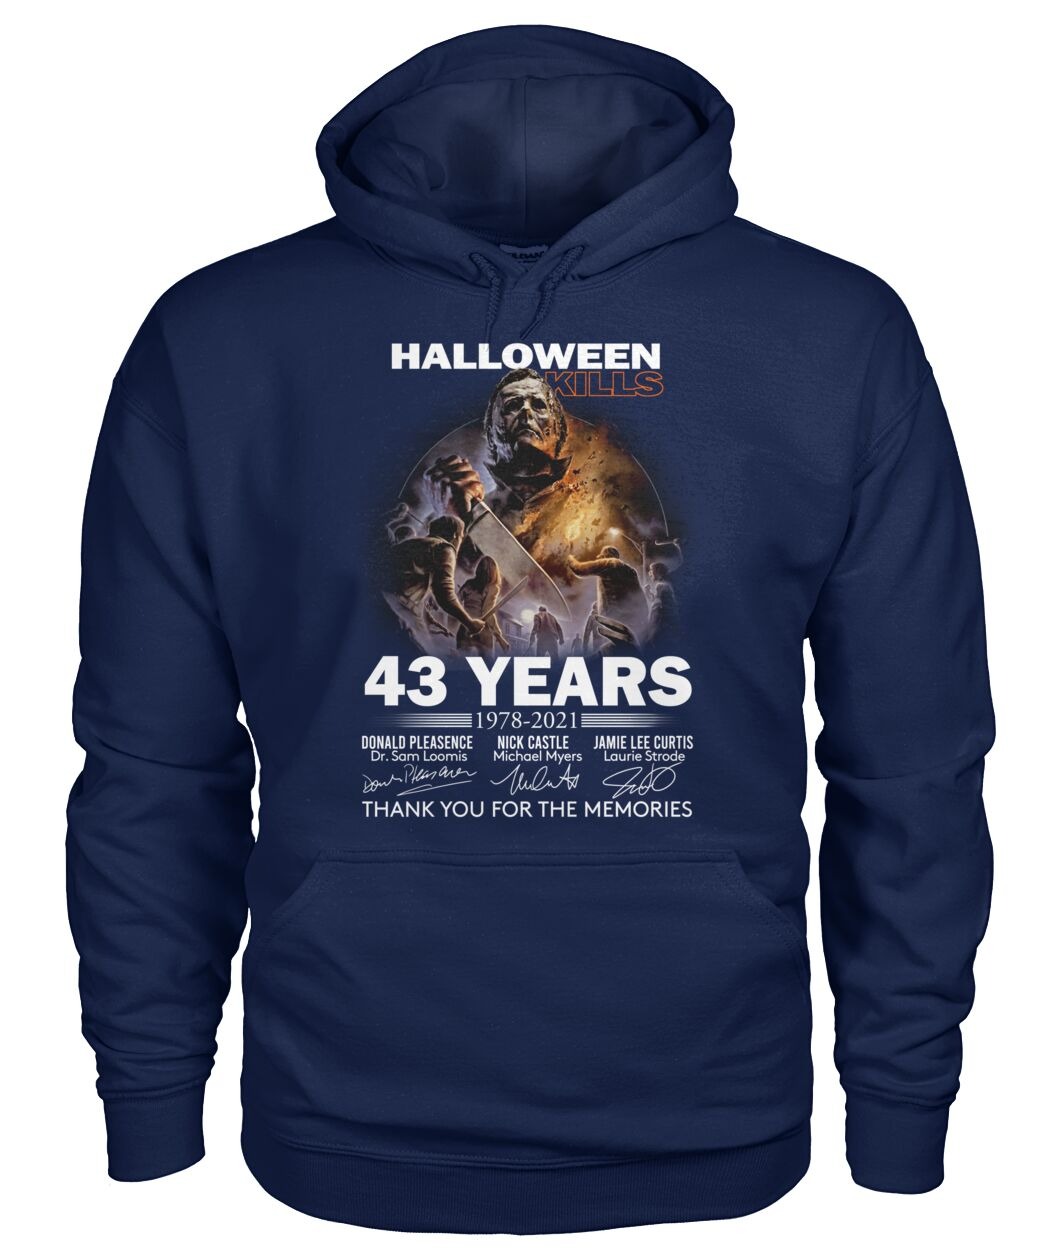 Michael myers halloween kills 43 years thank you for the memories hoodie